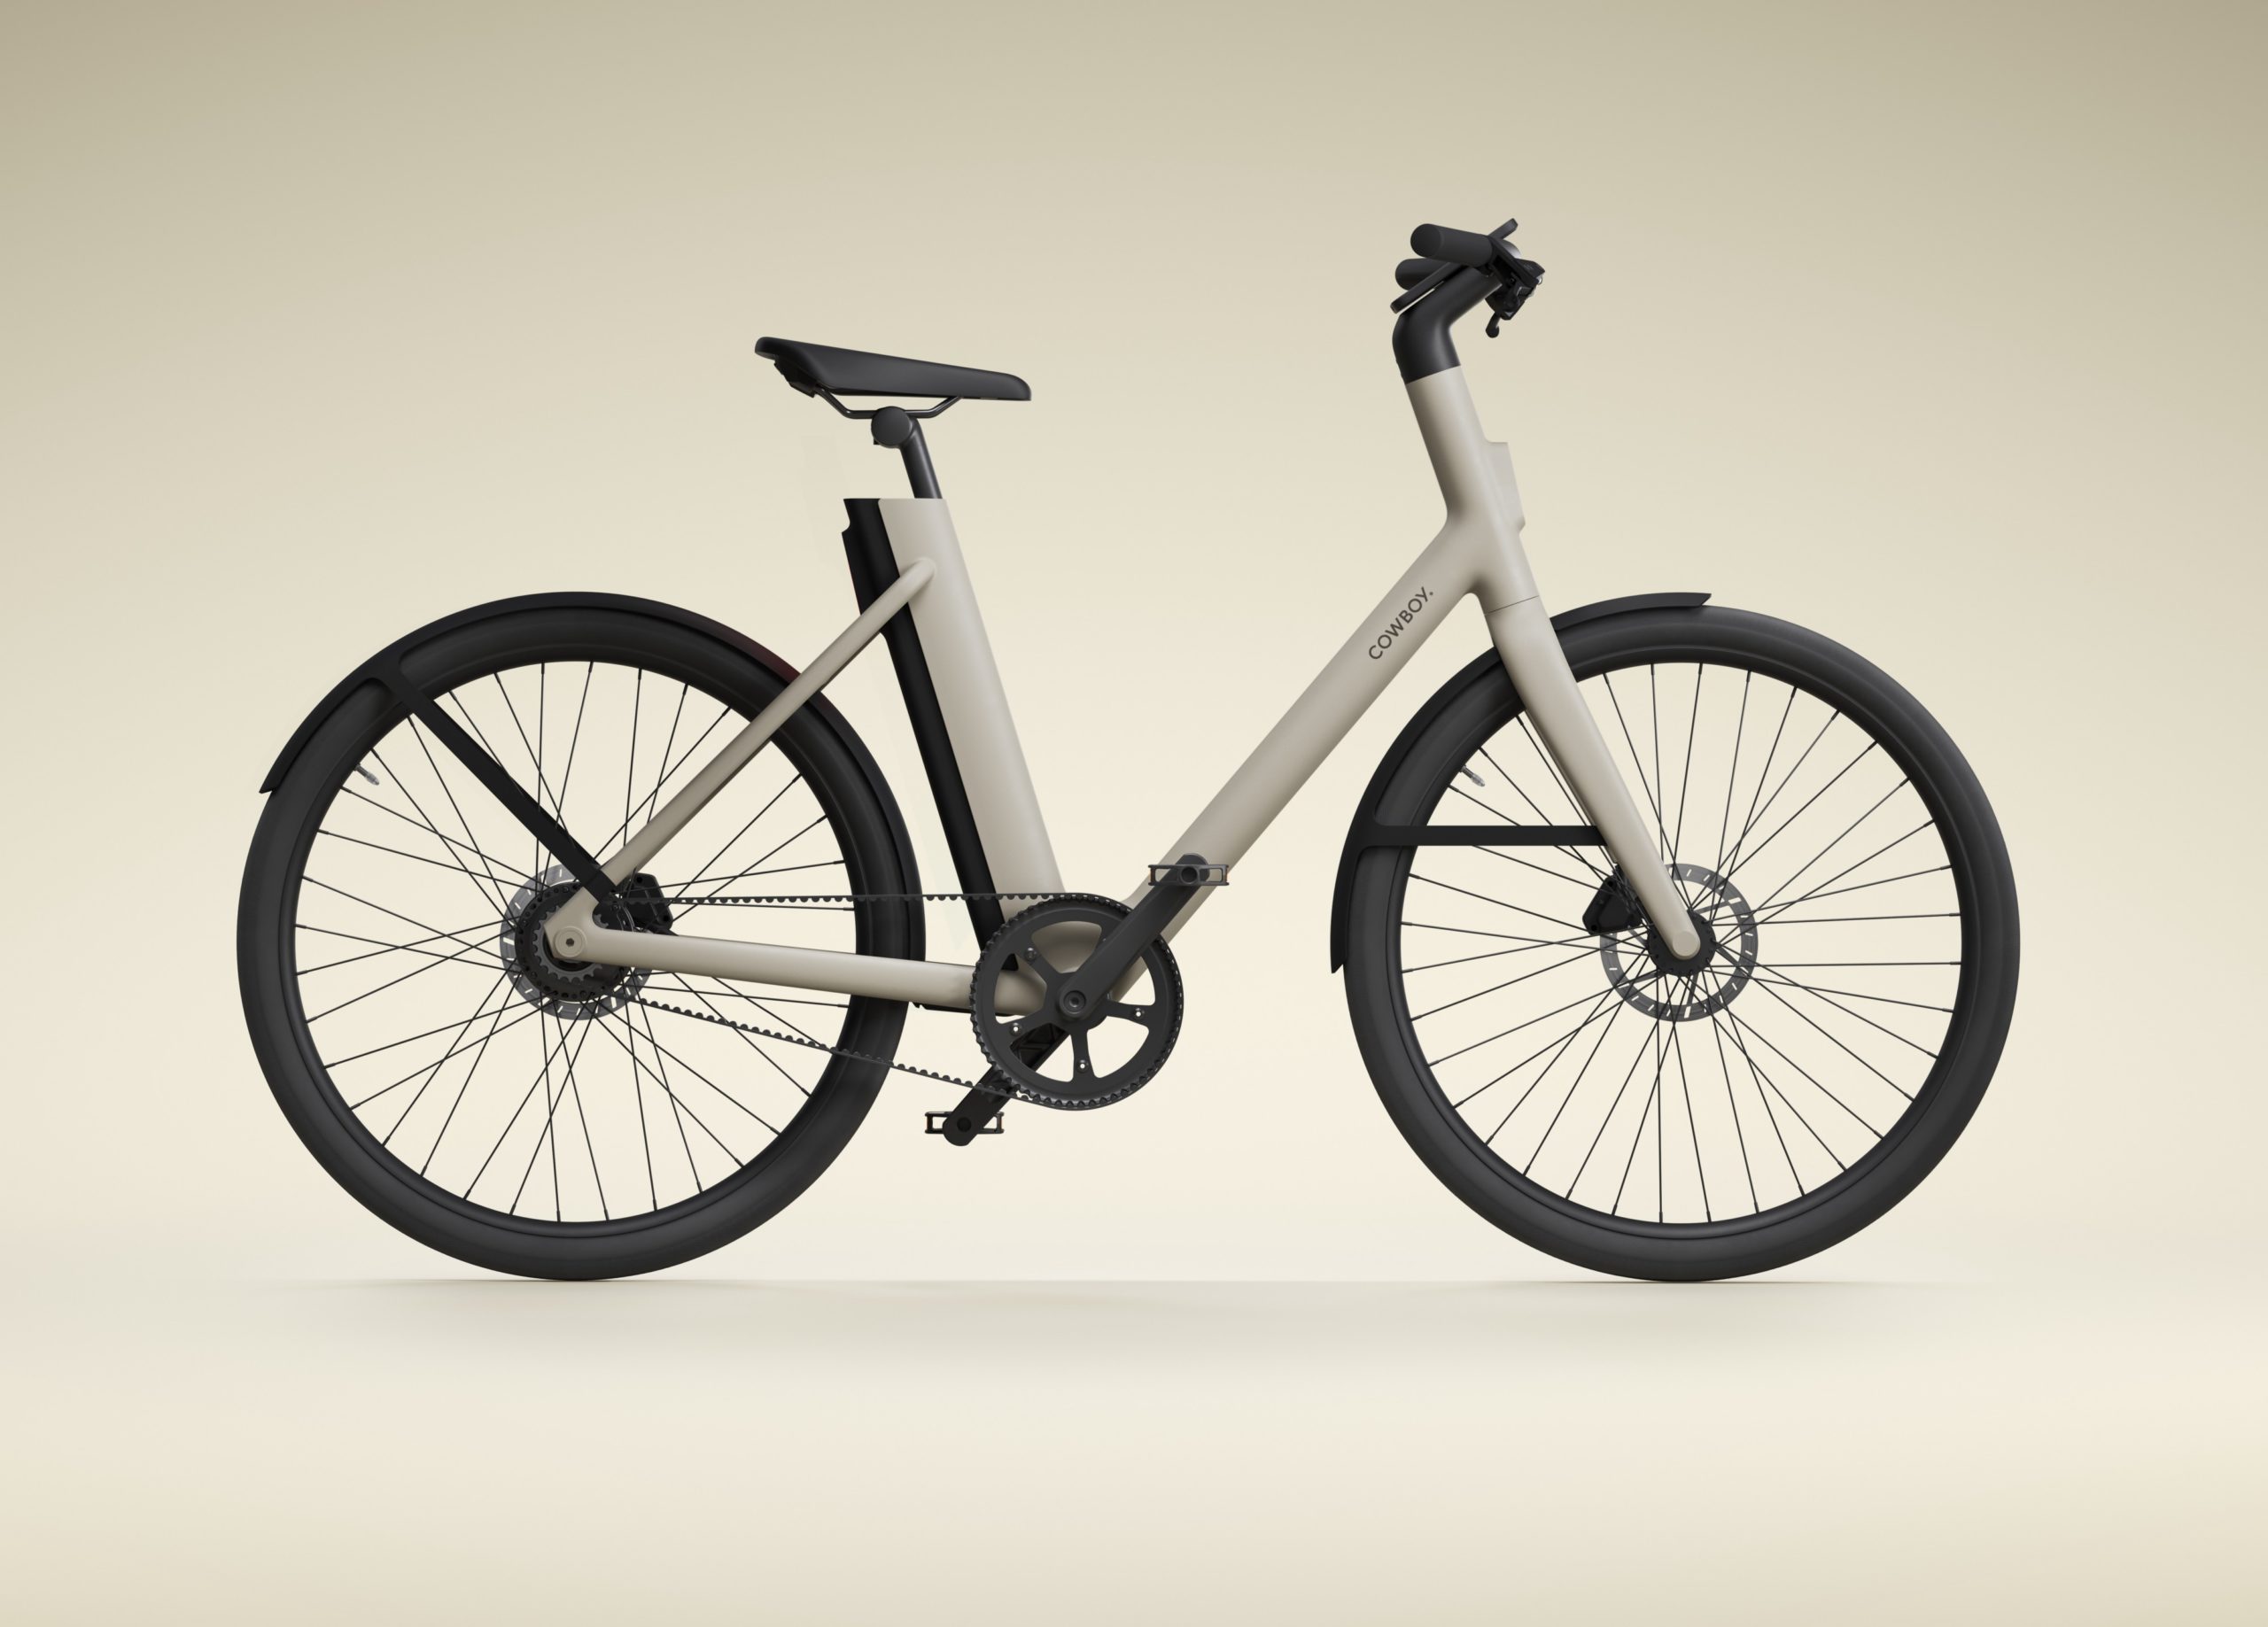 Belgian Cowboy launches 4th generation connected e-bike